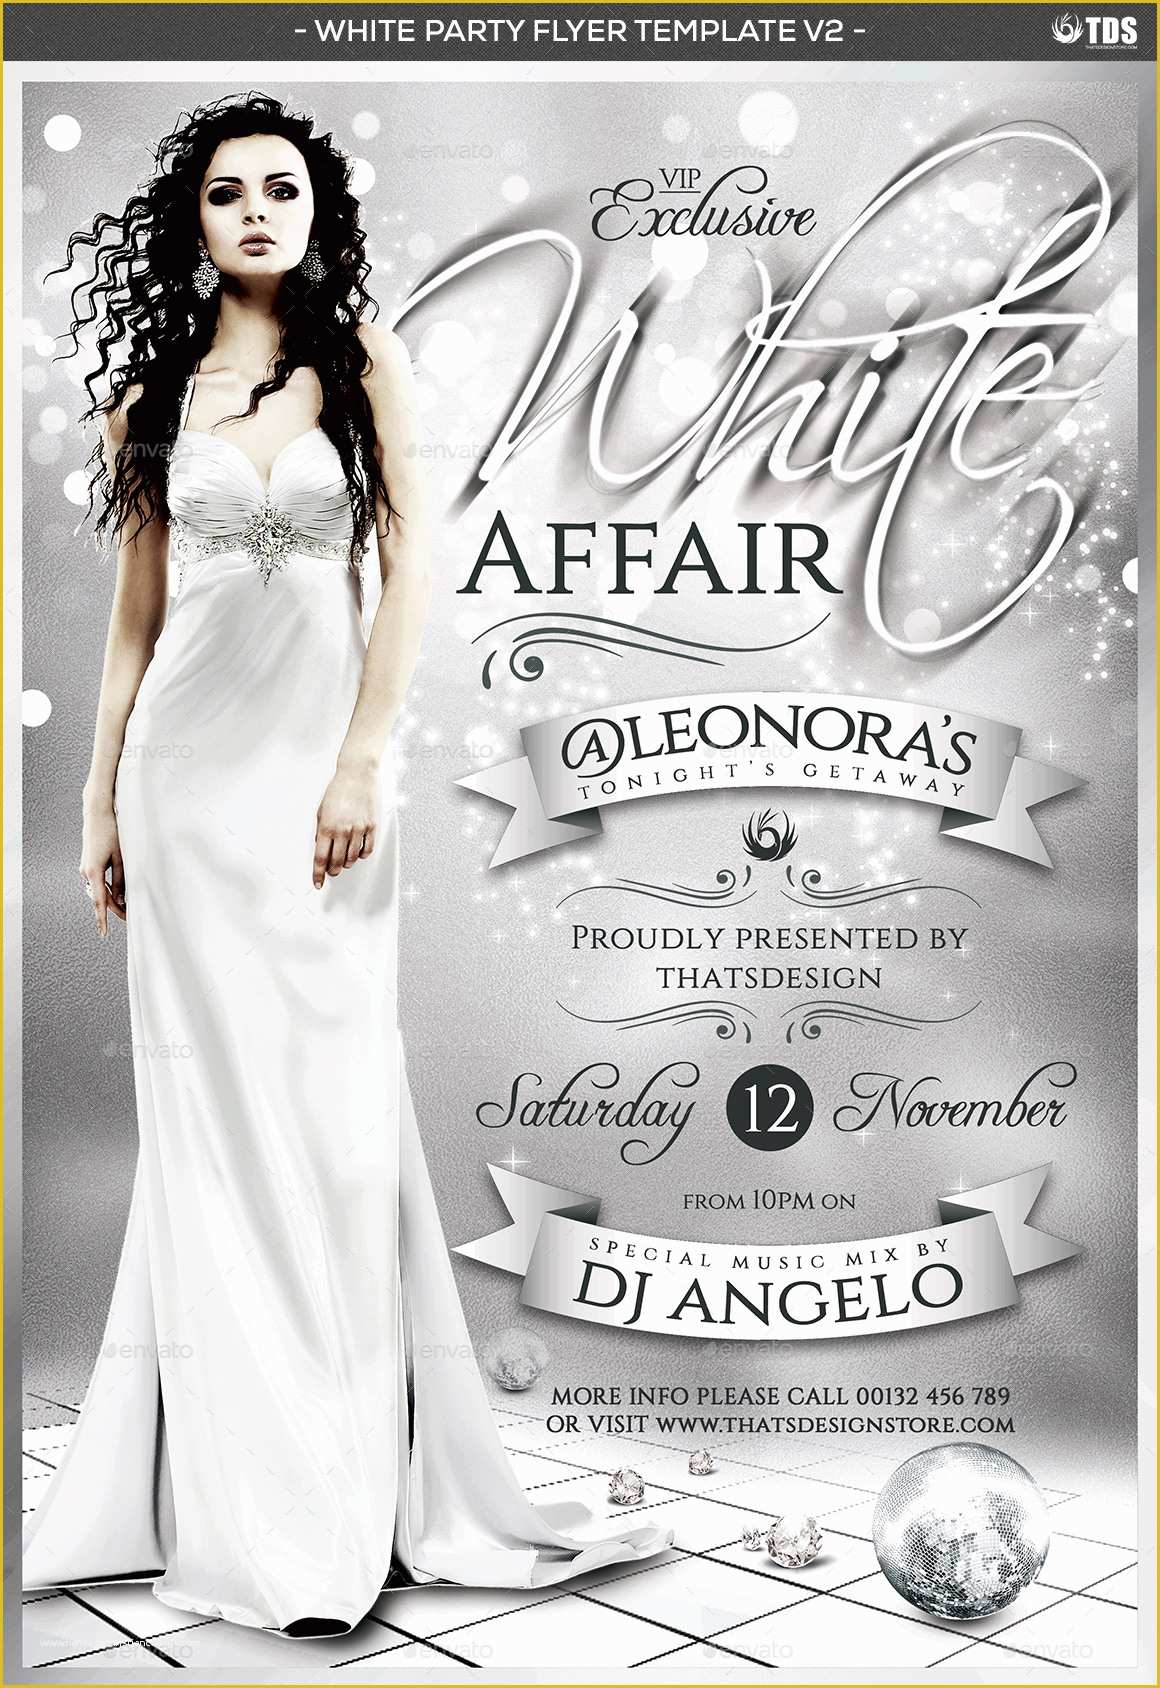 Party Flyer Template Free Of White Party Flyer Template Yourweek 1a82c4eca25e